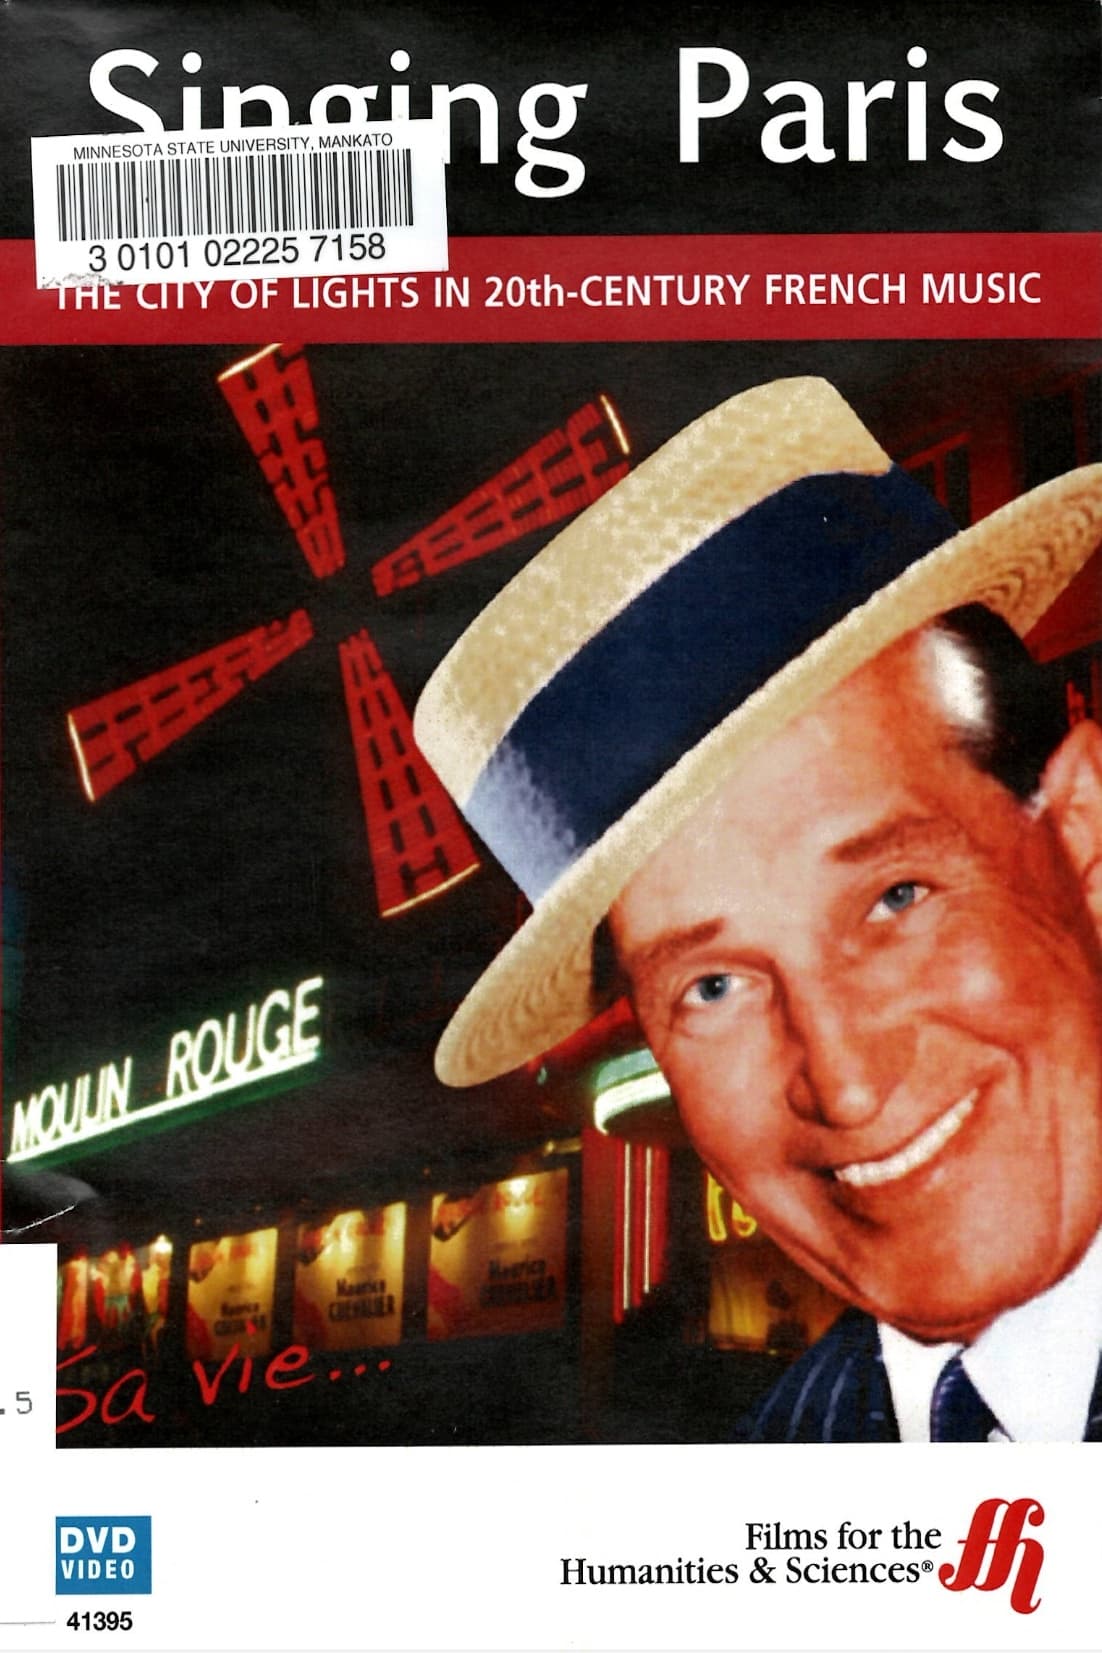 Singing Paris: The City of Lights in 20th-Century French Music